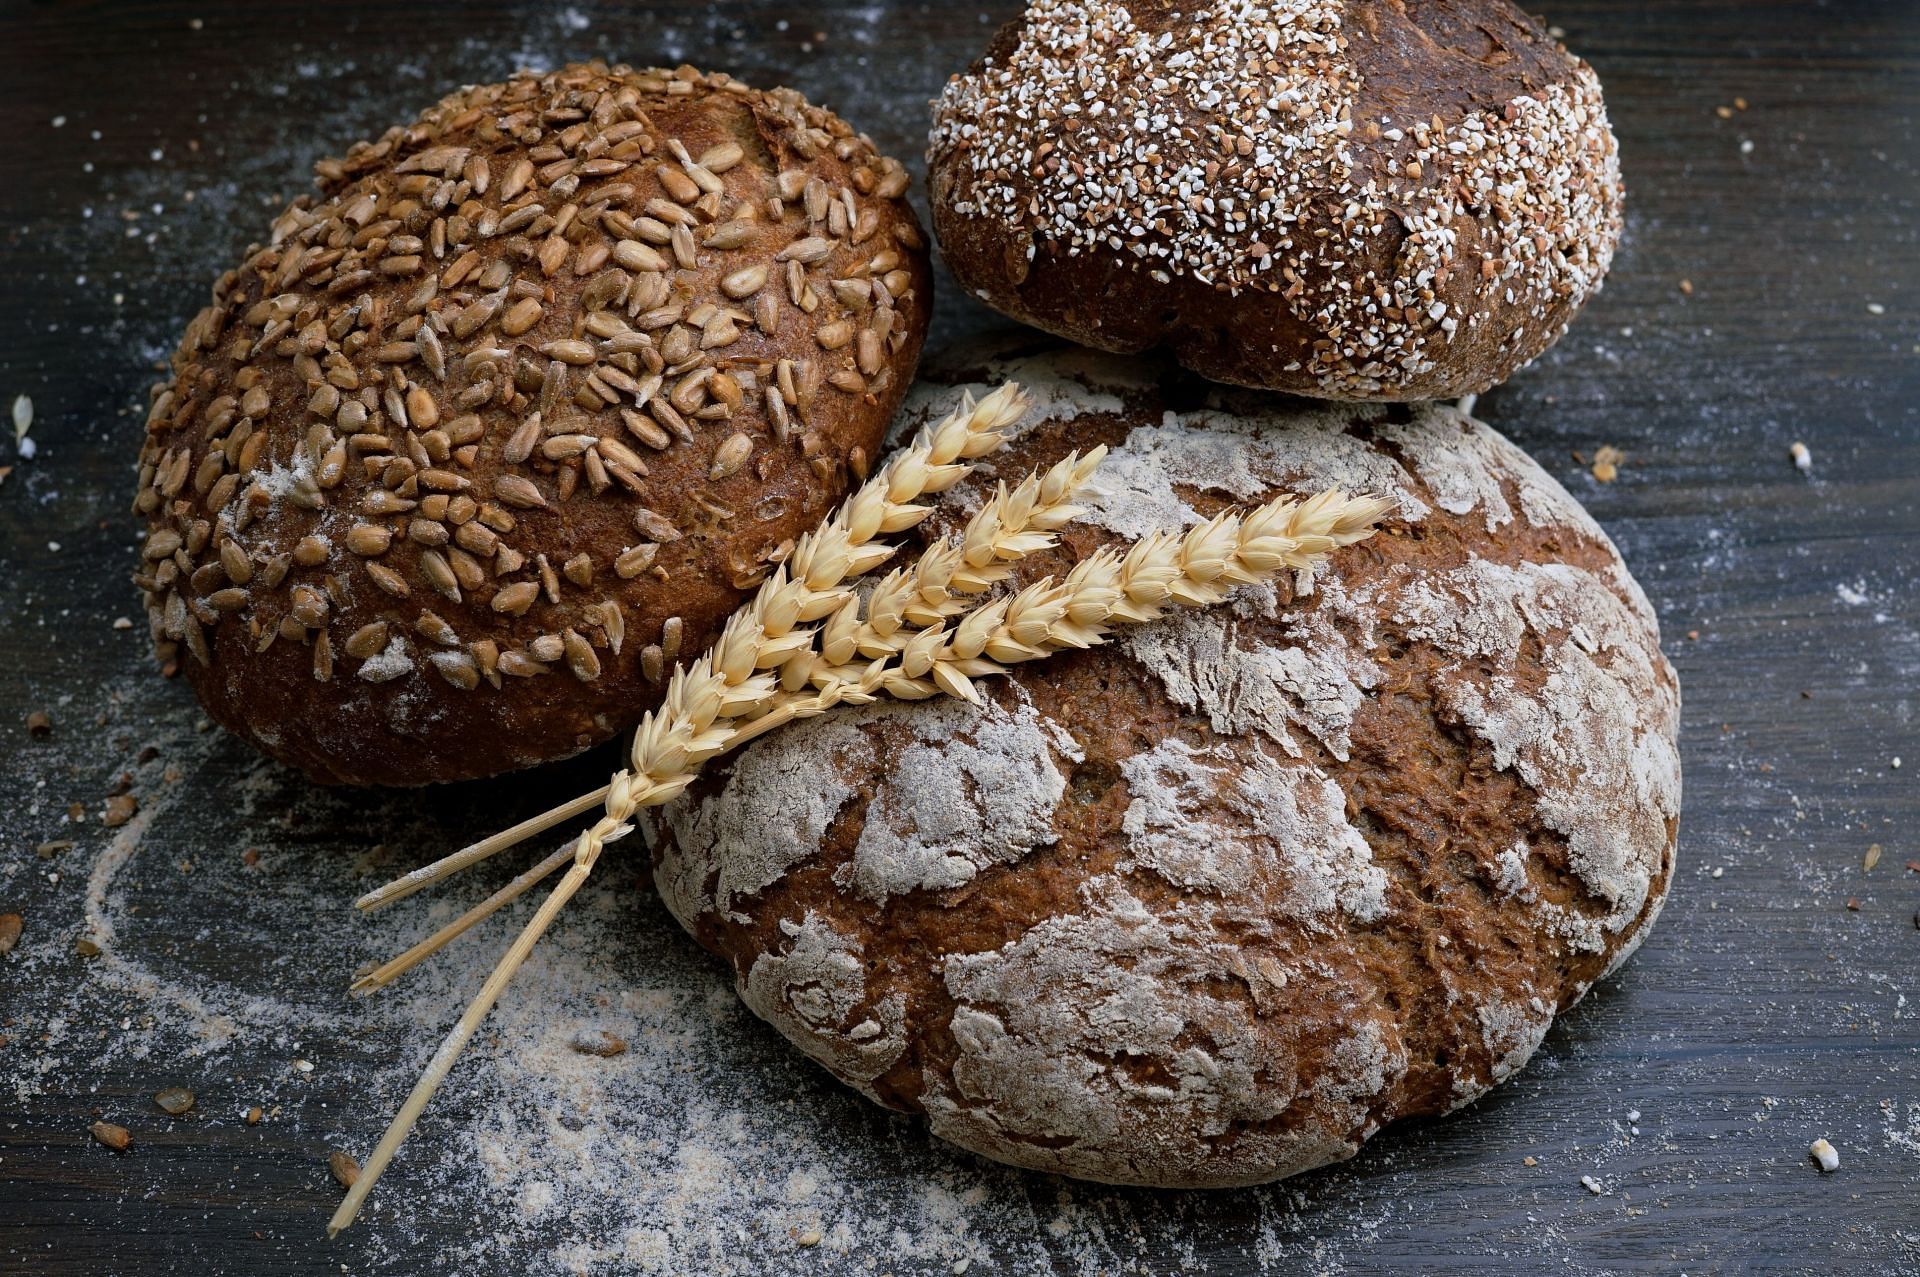 Gluten-rich bread can cause bloating and allergies. (Image via Unsplash/Wesual Click)